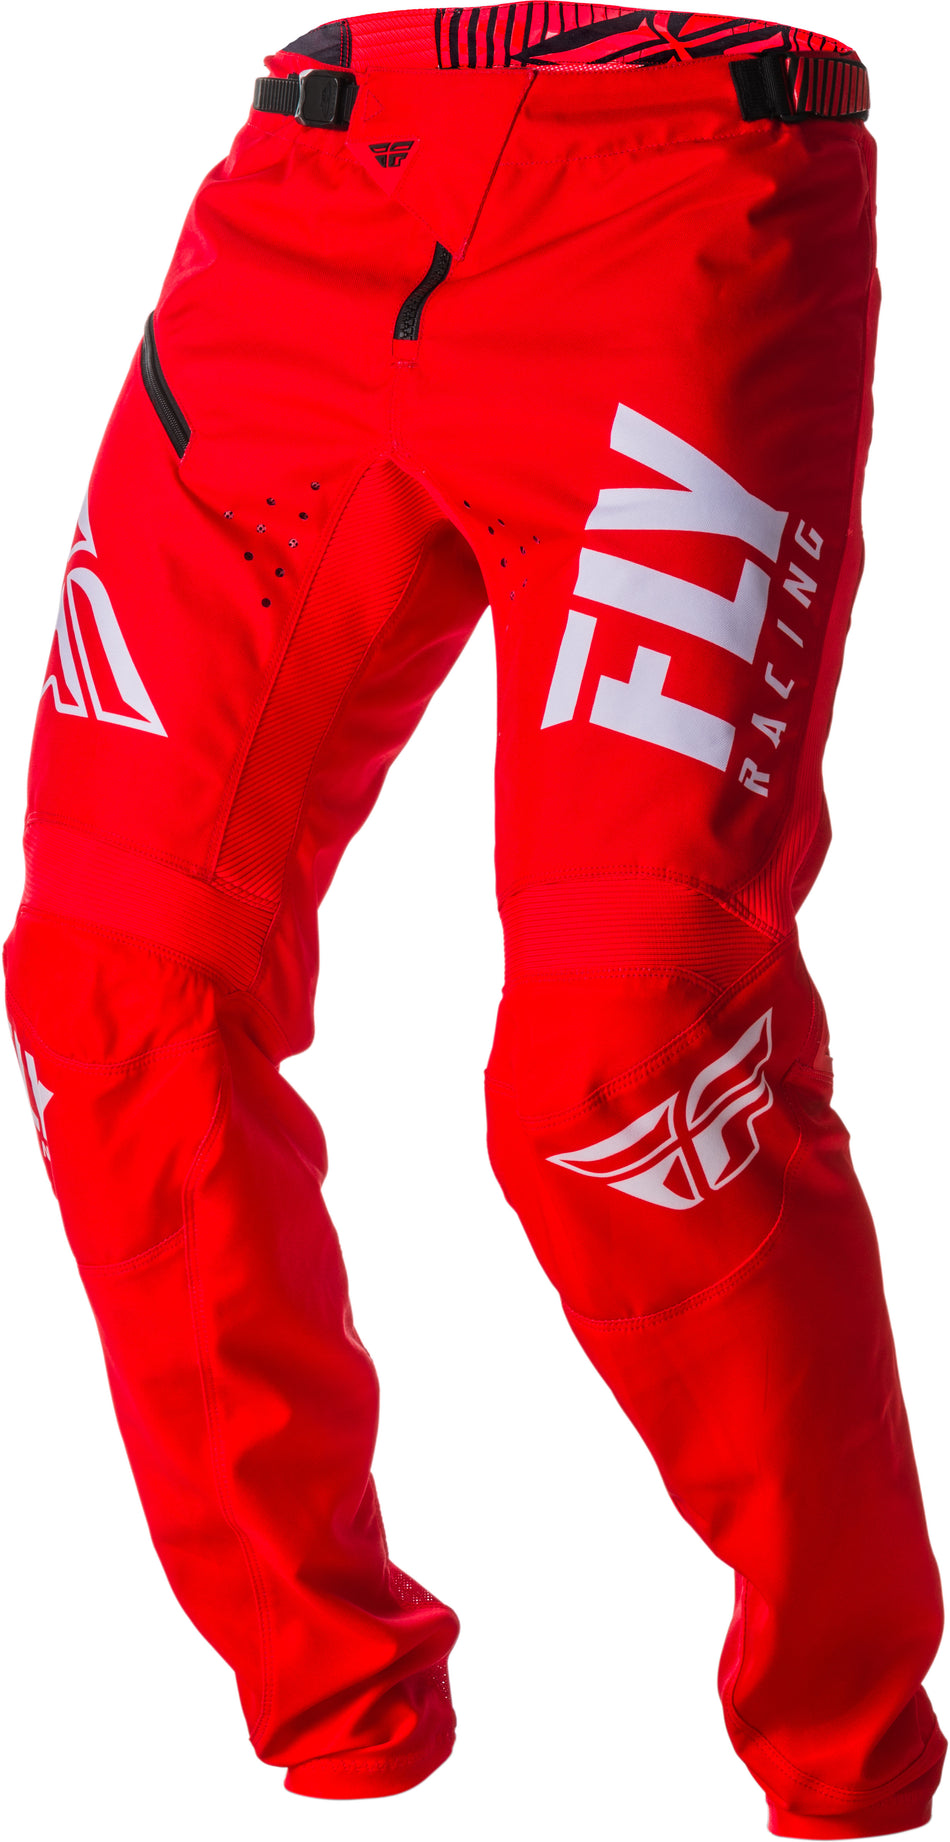 FLY RACING Kinetic Shield Bicycle Pants Red/White Sz 28 372-02228